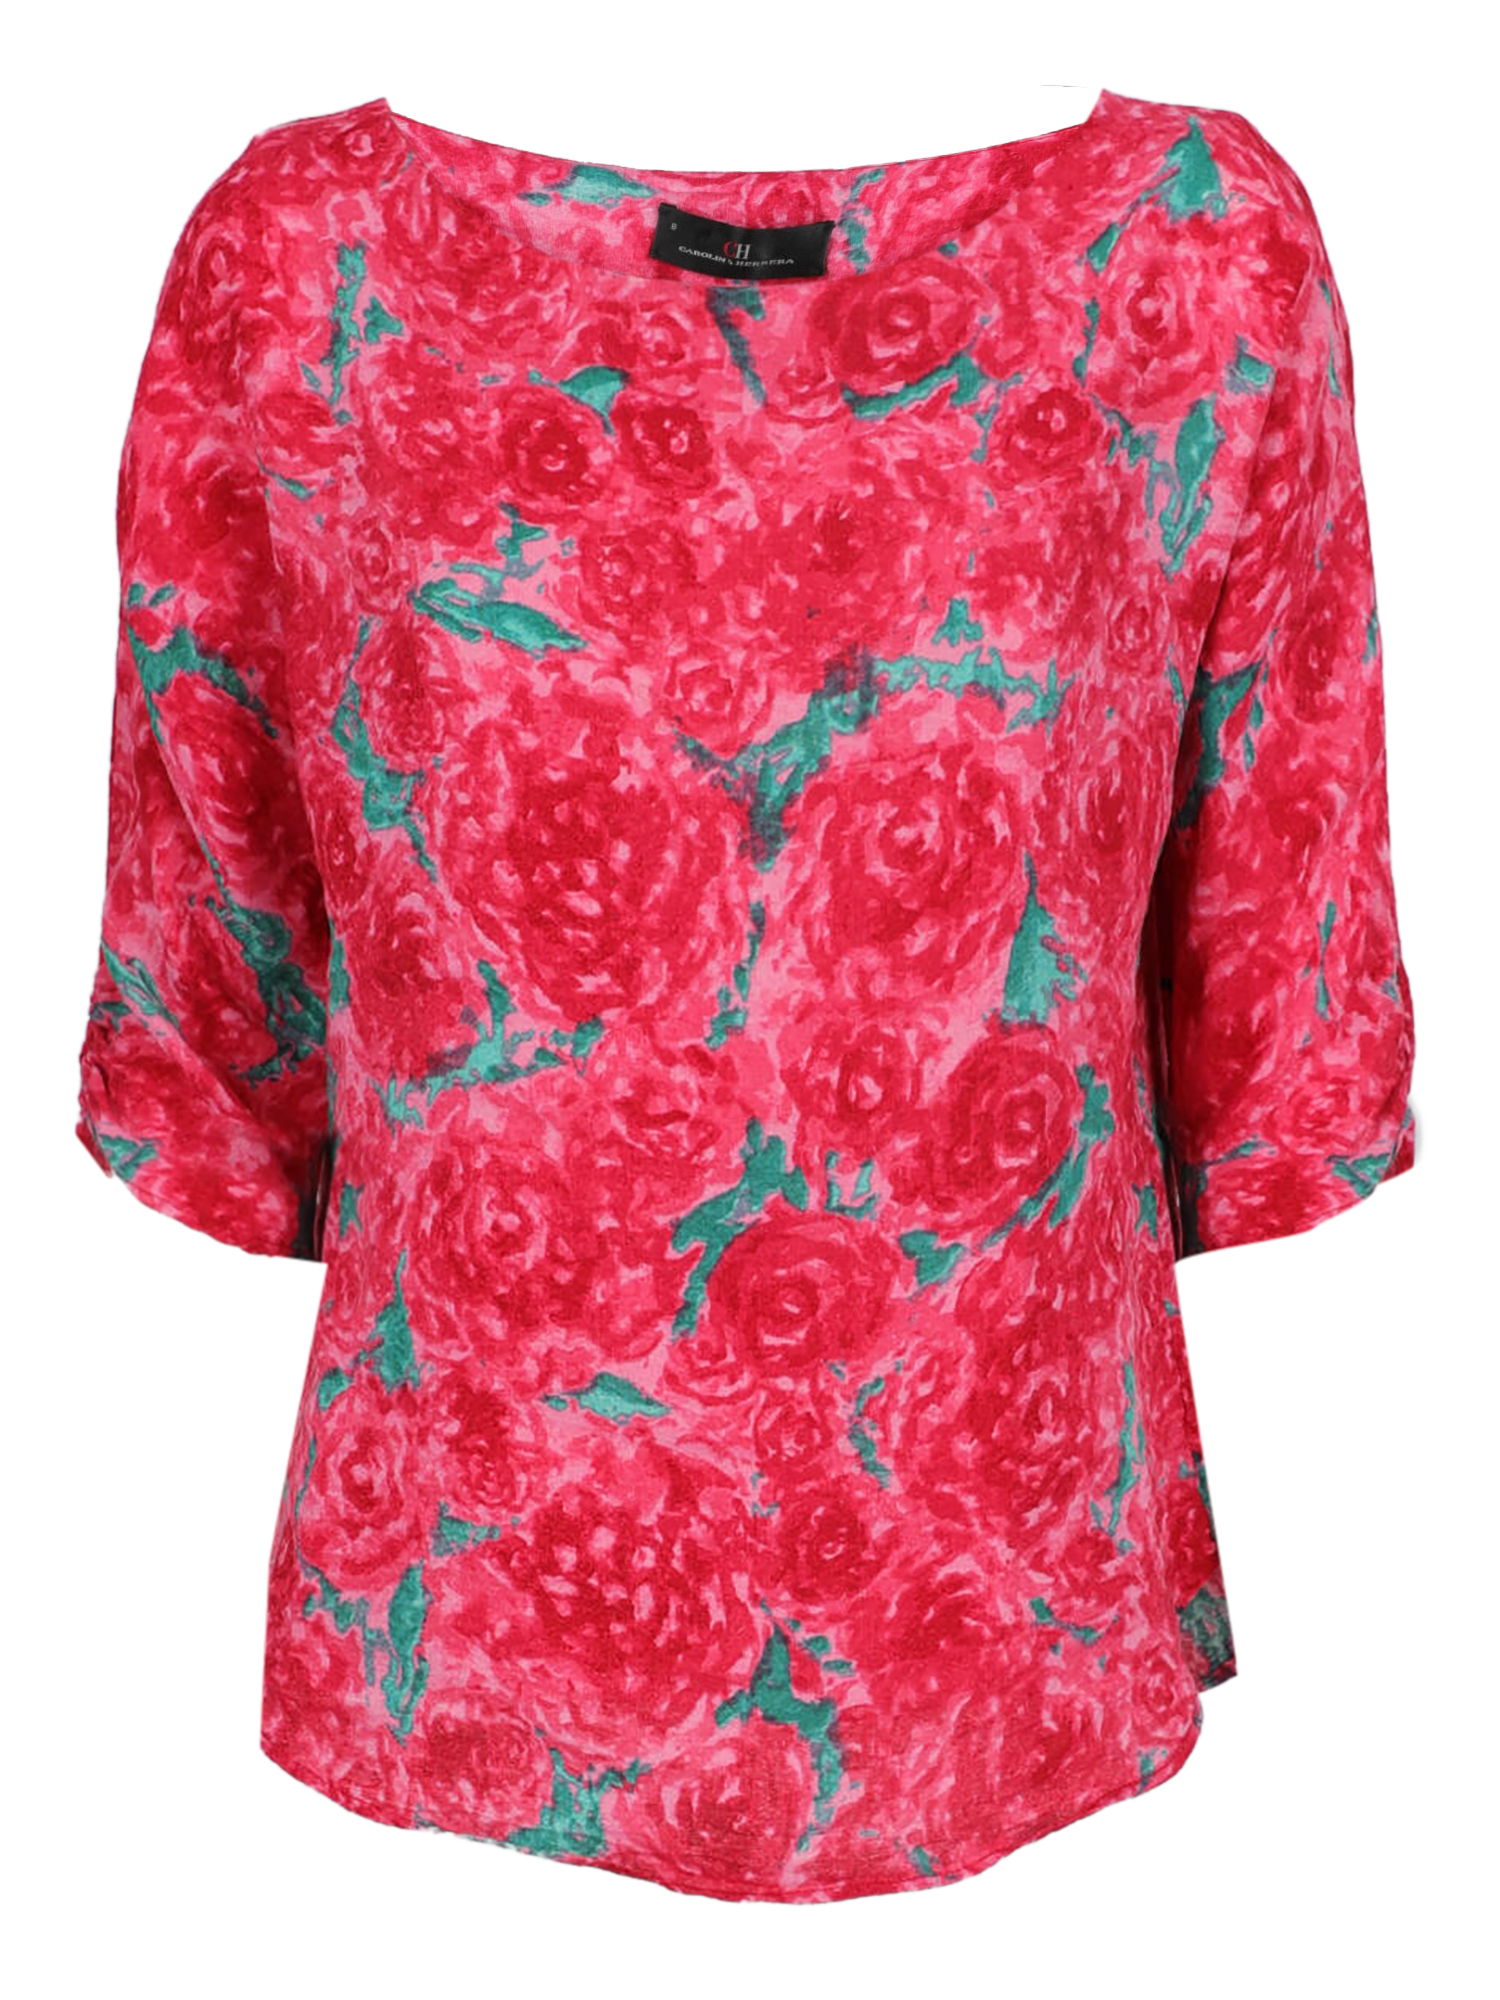 Condition: Good, Floral Print Silk, Color: Pink, Red - M - US 8 -